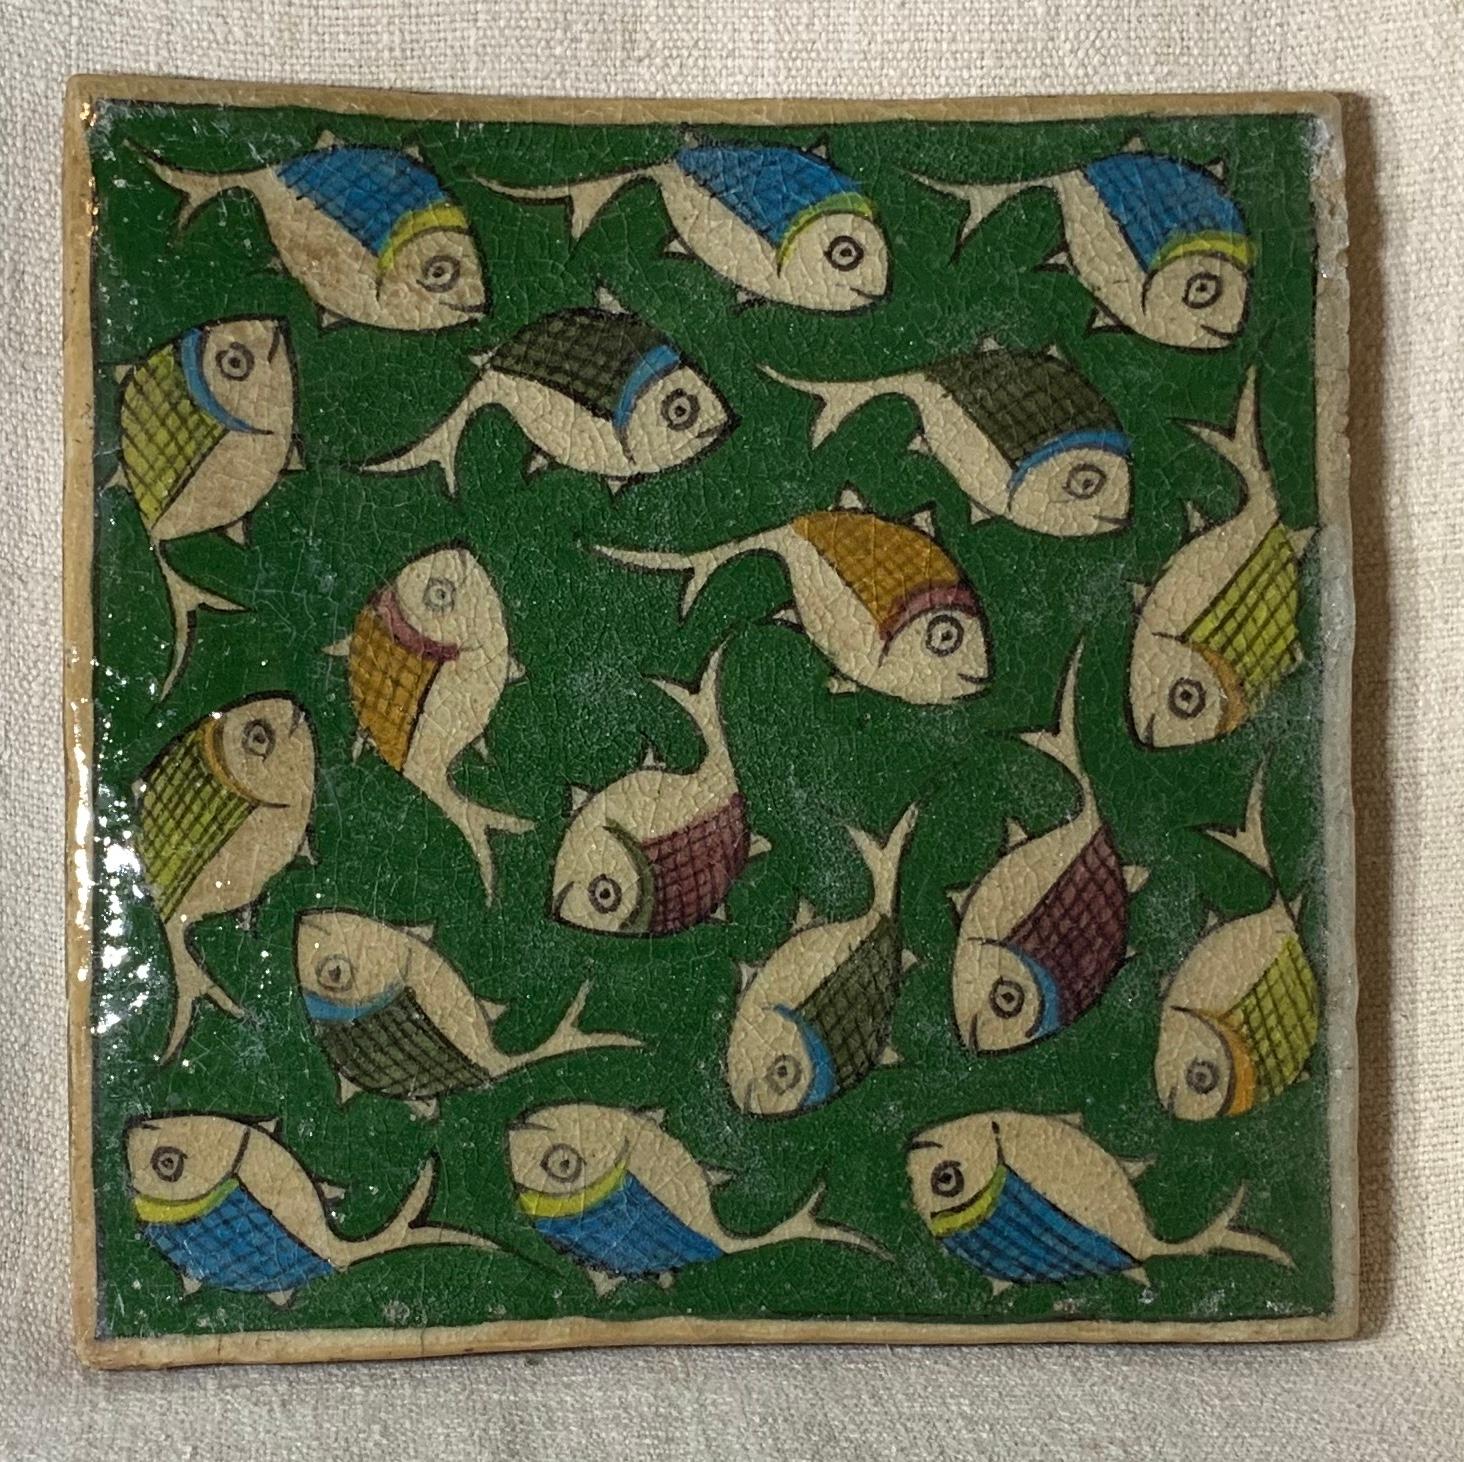 Beautiful Persian tile hand painted and glazed with exceptional wondering school of colorful fish, on a green color background.
The tile can hang on the wall, or display on wood Stand, wood Stand is not included.